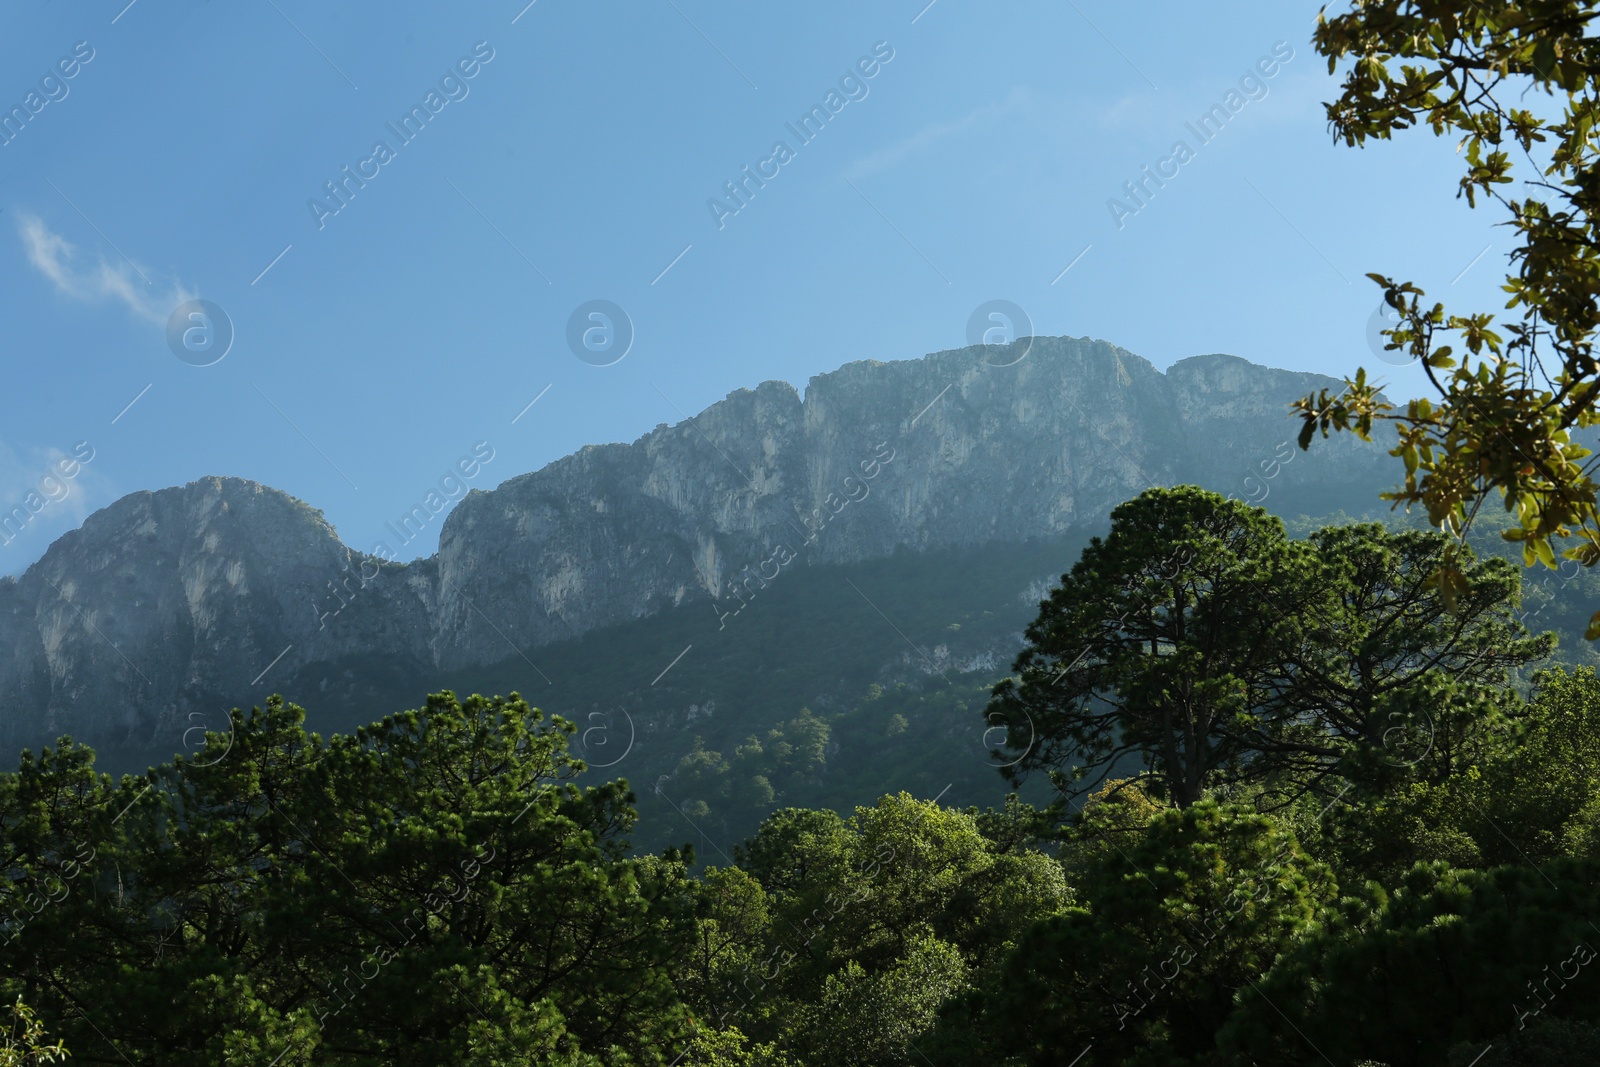 Photo of Big mountains and trees under cloudy sky